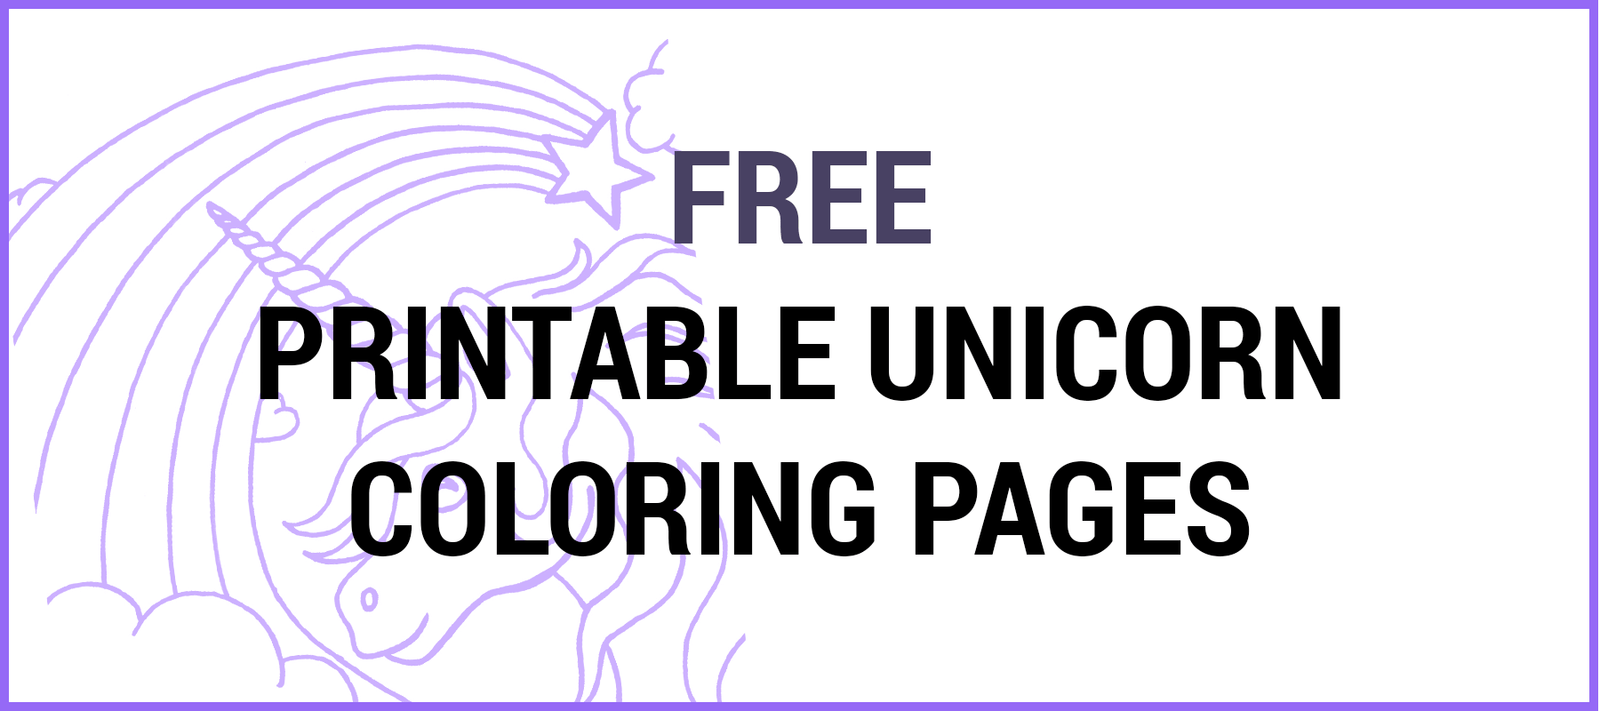 Easy Unicorn Coloring Pages To Print